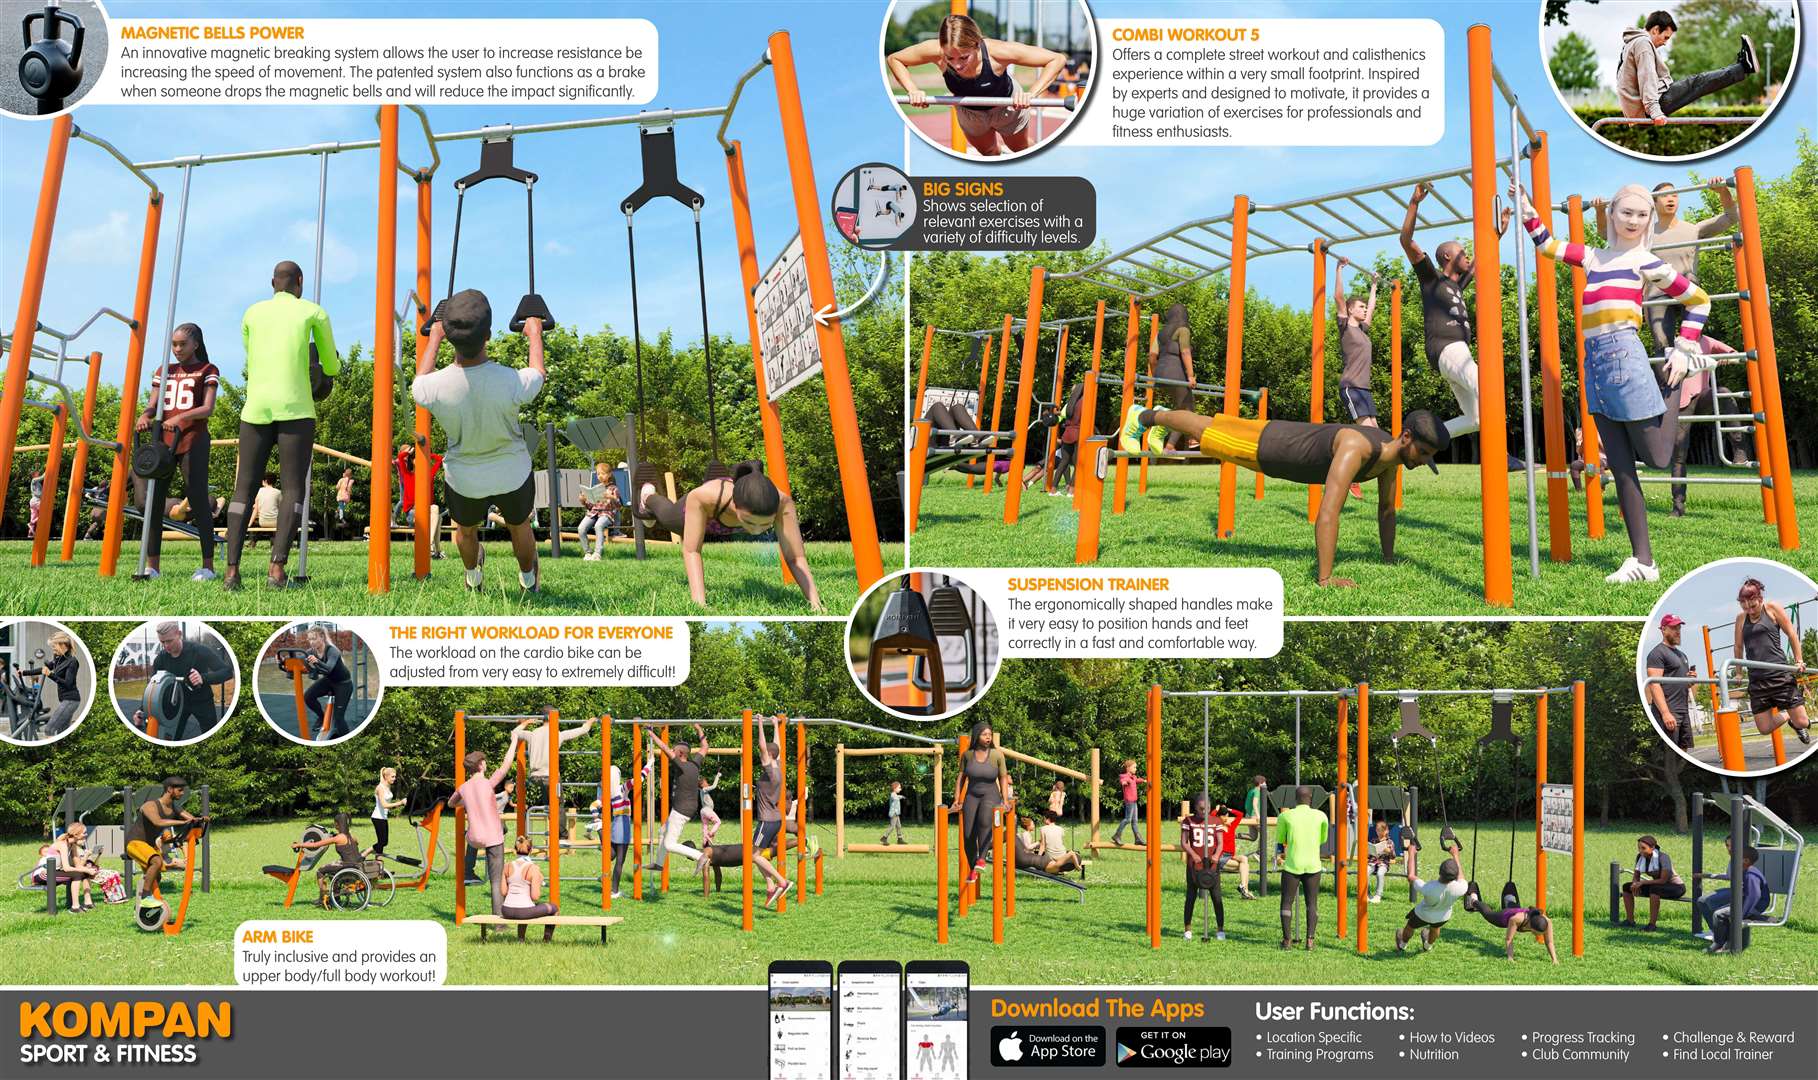 KOMPAN Forres outdoor gym - 3D presentation page two.